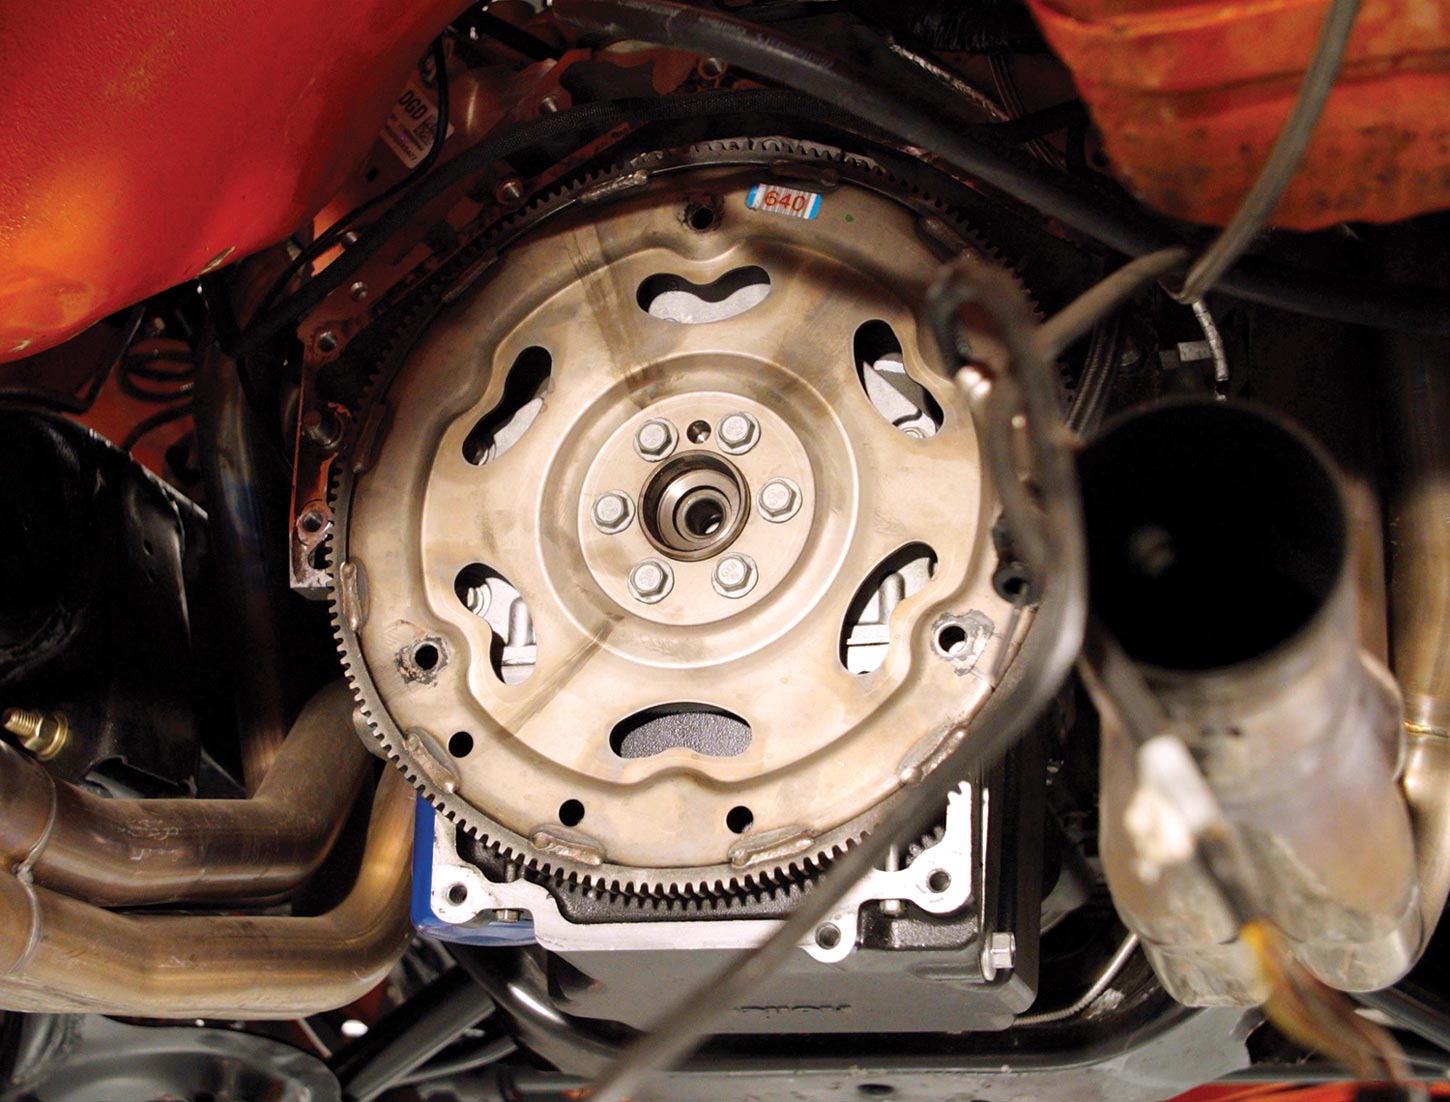 view of the transmission flexplate on the lifted Camaro